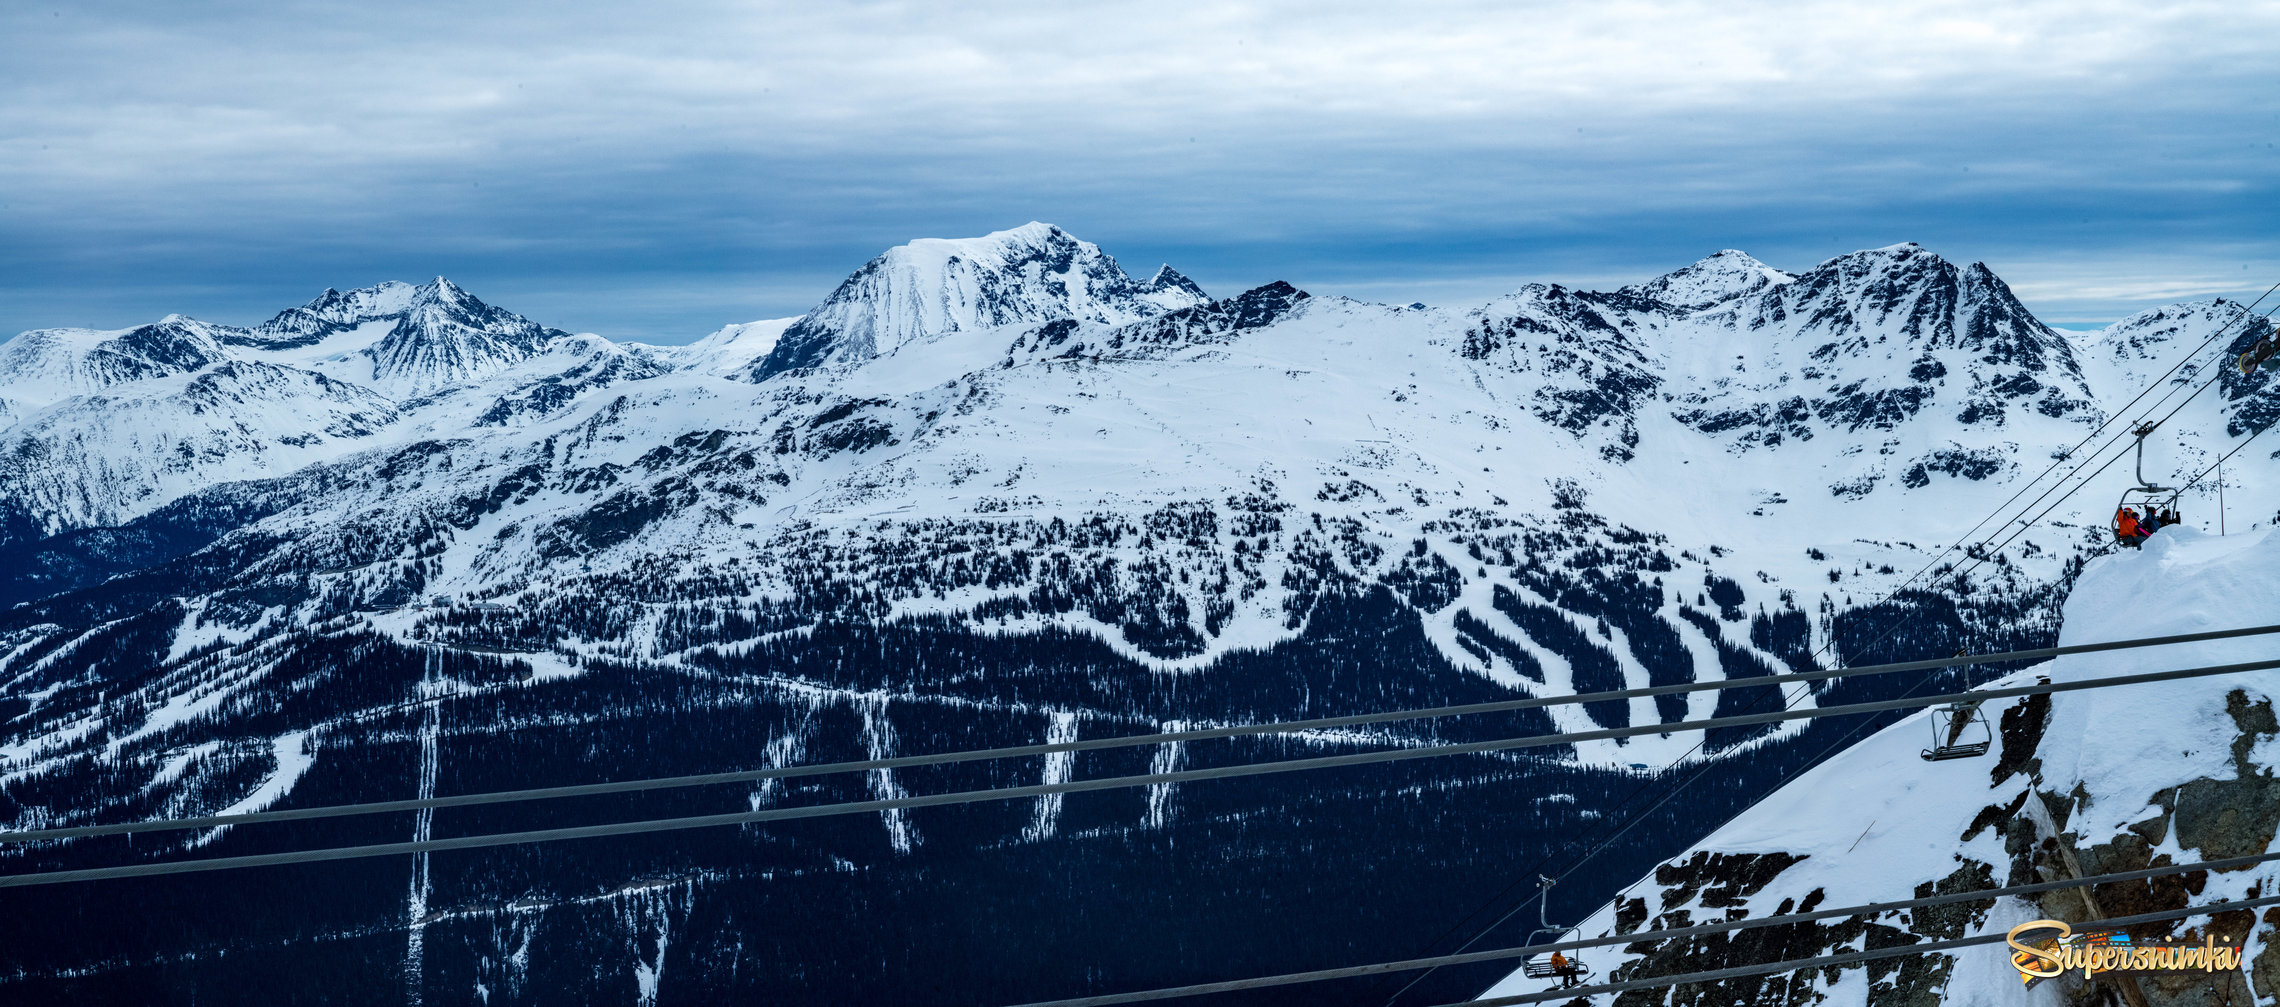 View of Backcomb Mountain from Whistler Mountaintop.